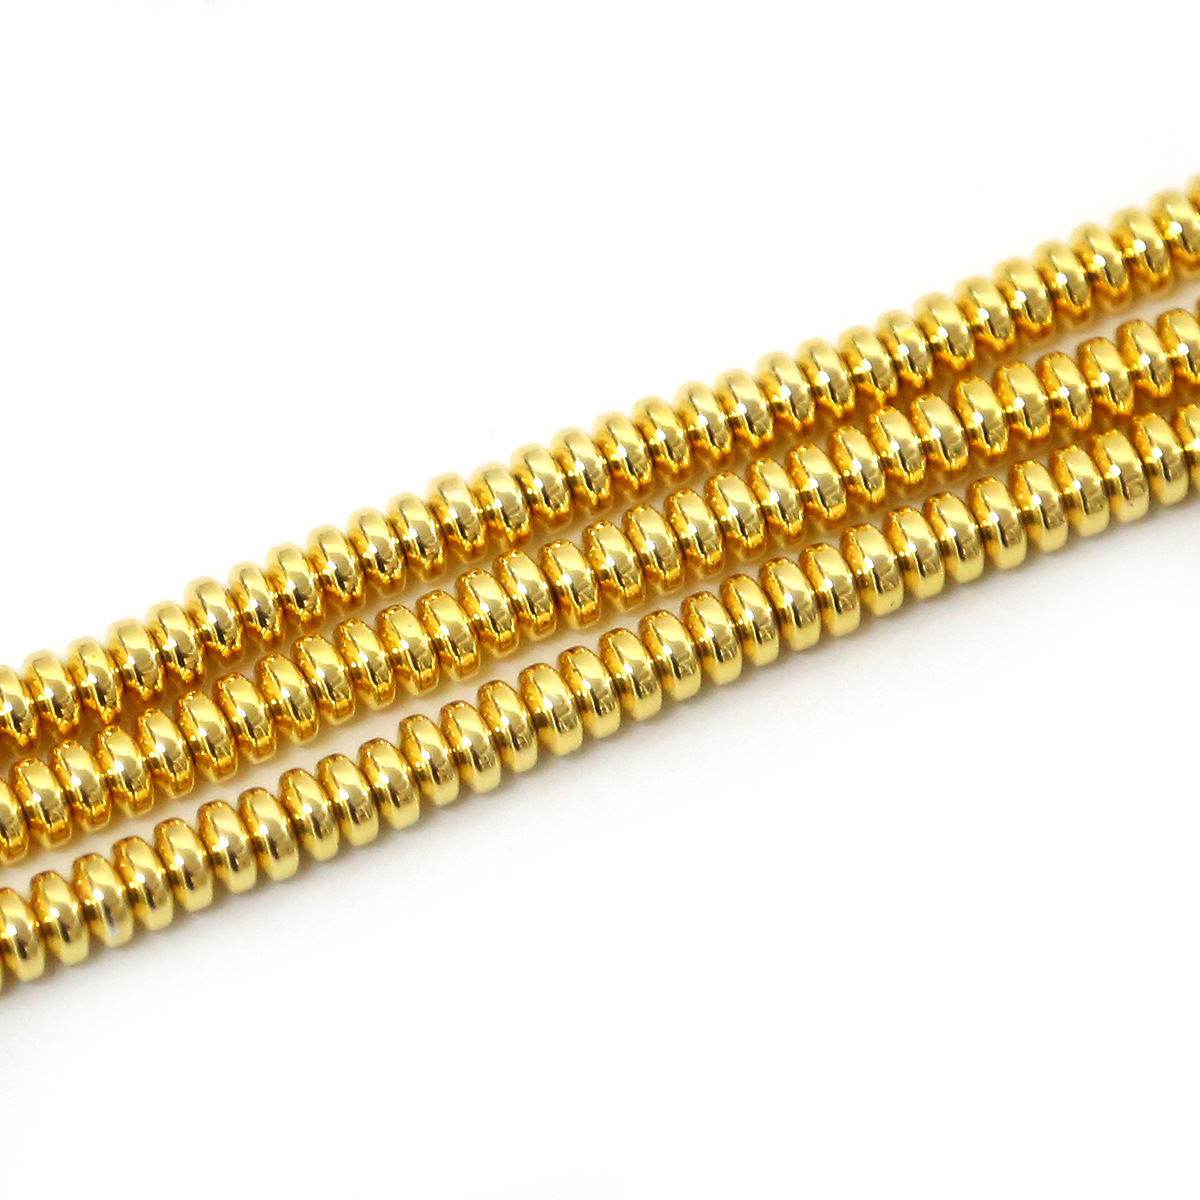 4*2mm approximately 200pcs/bag gold color plated